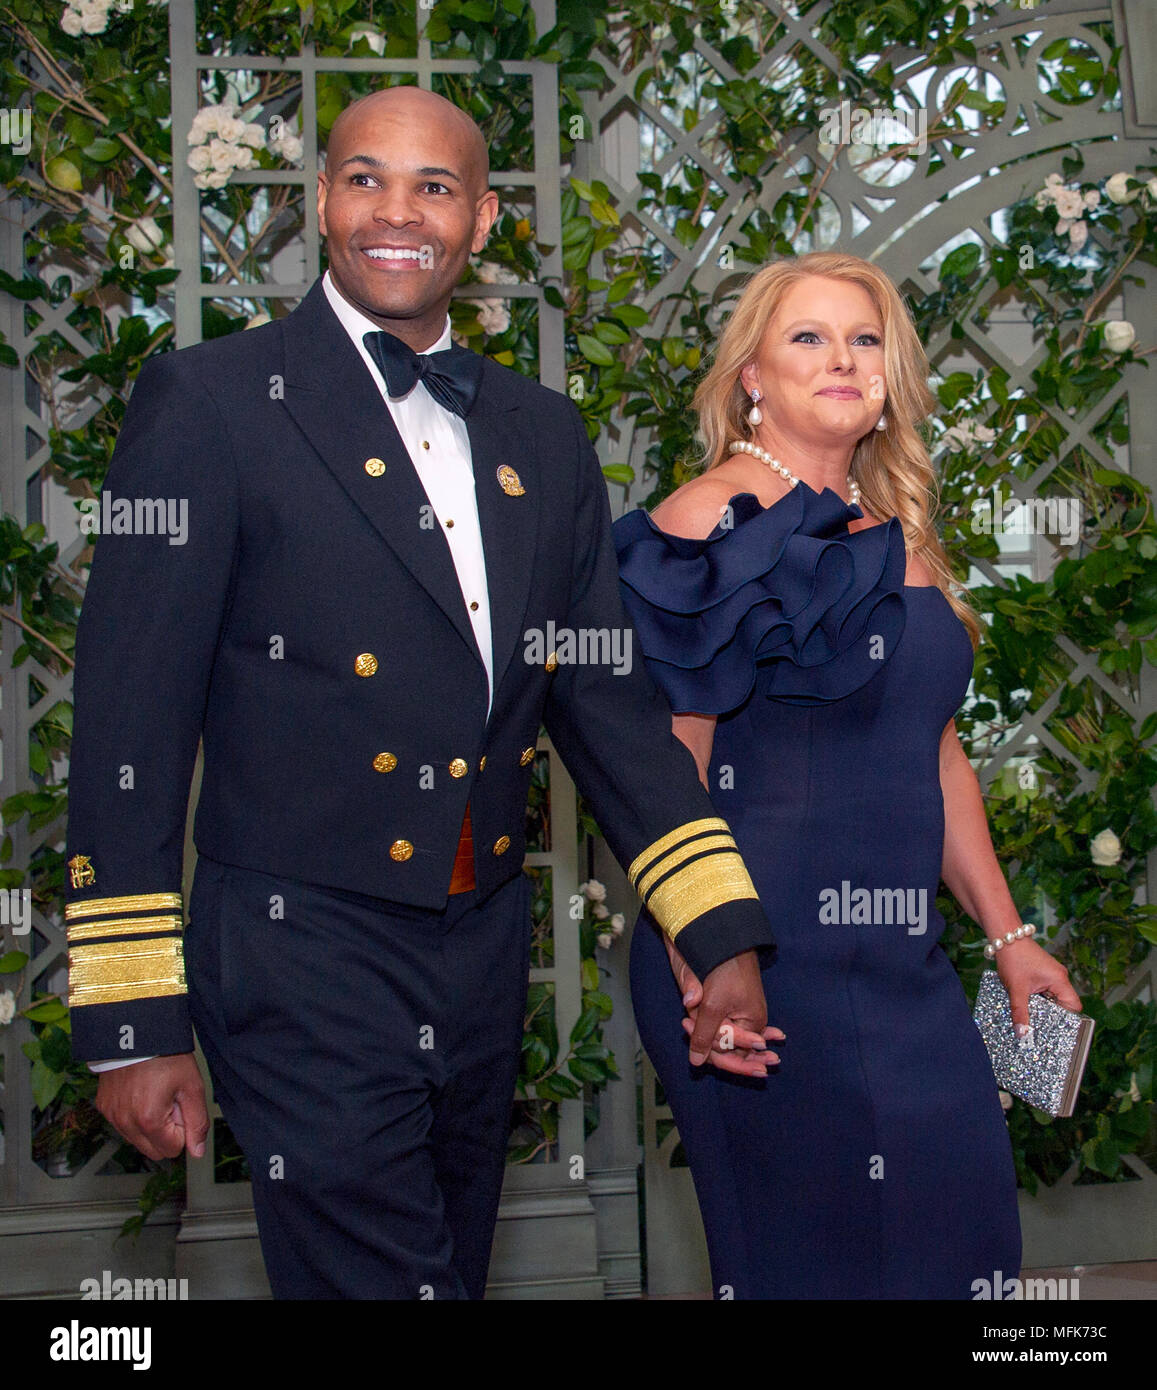 Washington, USA. 24th Apr, 2018. United States Surgeon General Jerome Adams and Mrs. Lacey Adams arrive for the State Dinner honoring Dinner honoring President Emmanuel Macron of the French Republic and Mrs. Brigitte Macron at the White House in Washington, DC on Tuesday, April 24, 2018. Credit: Ron Sachs/CNP - NO WIRE SERVICE - Credit: Ron Sachs/Consolidated News Photos/Ron Sachs - CNP/dpa/Alamy Live News Stock Photo